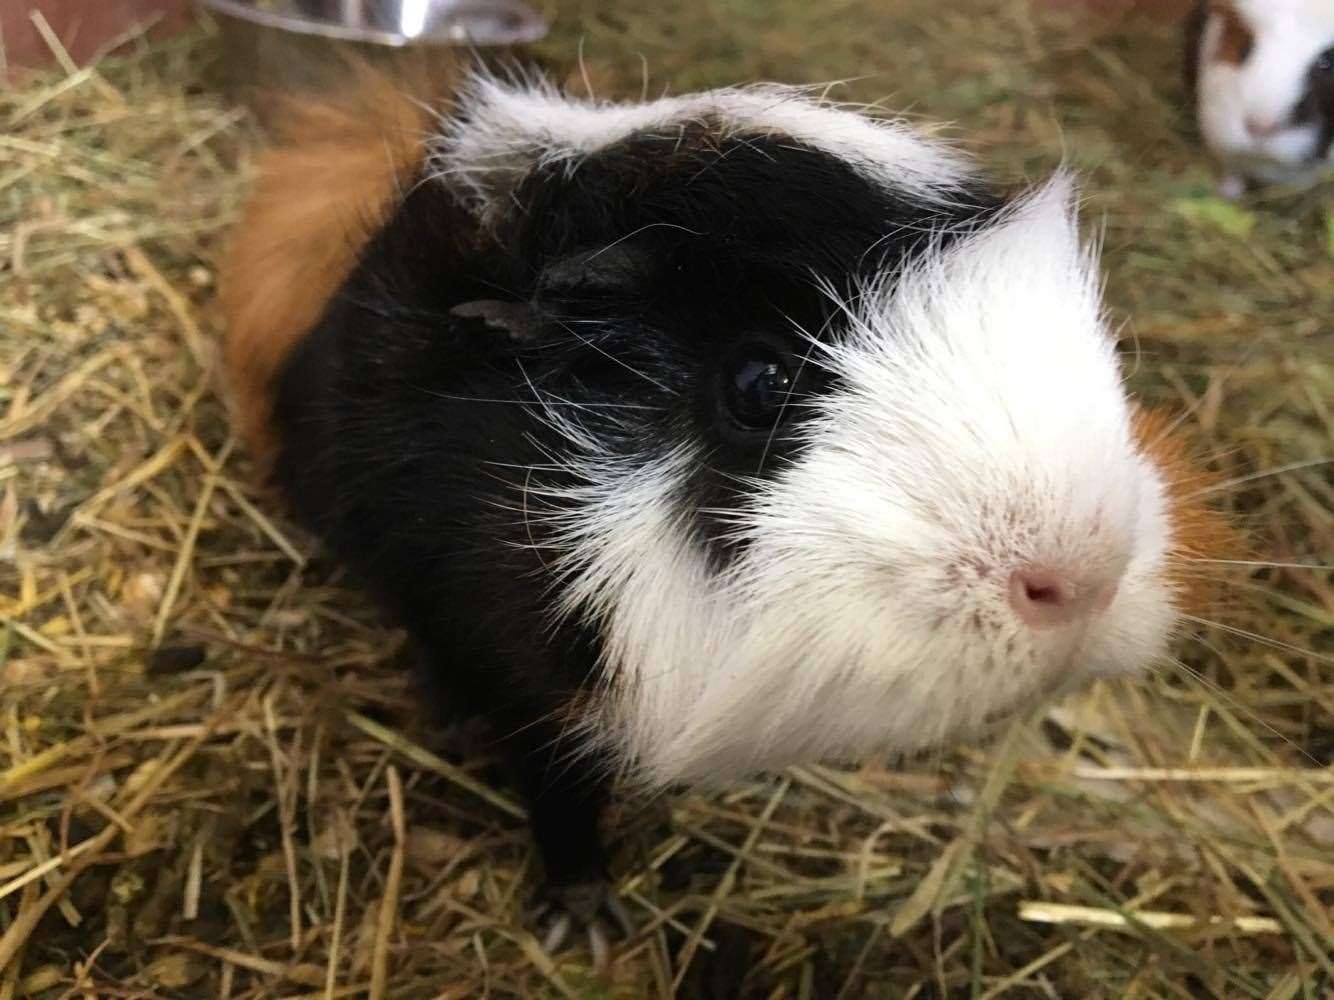 Guinea pigs can be a great pet for children – with a little guidance.